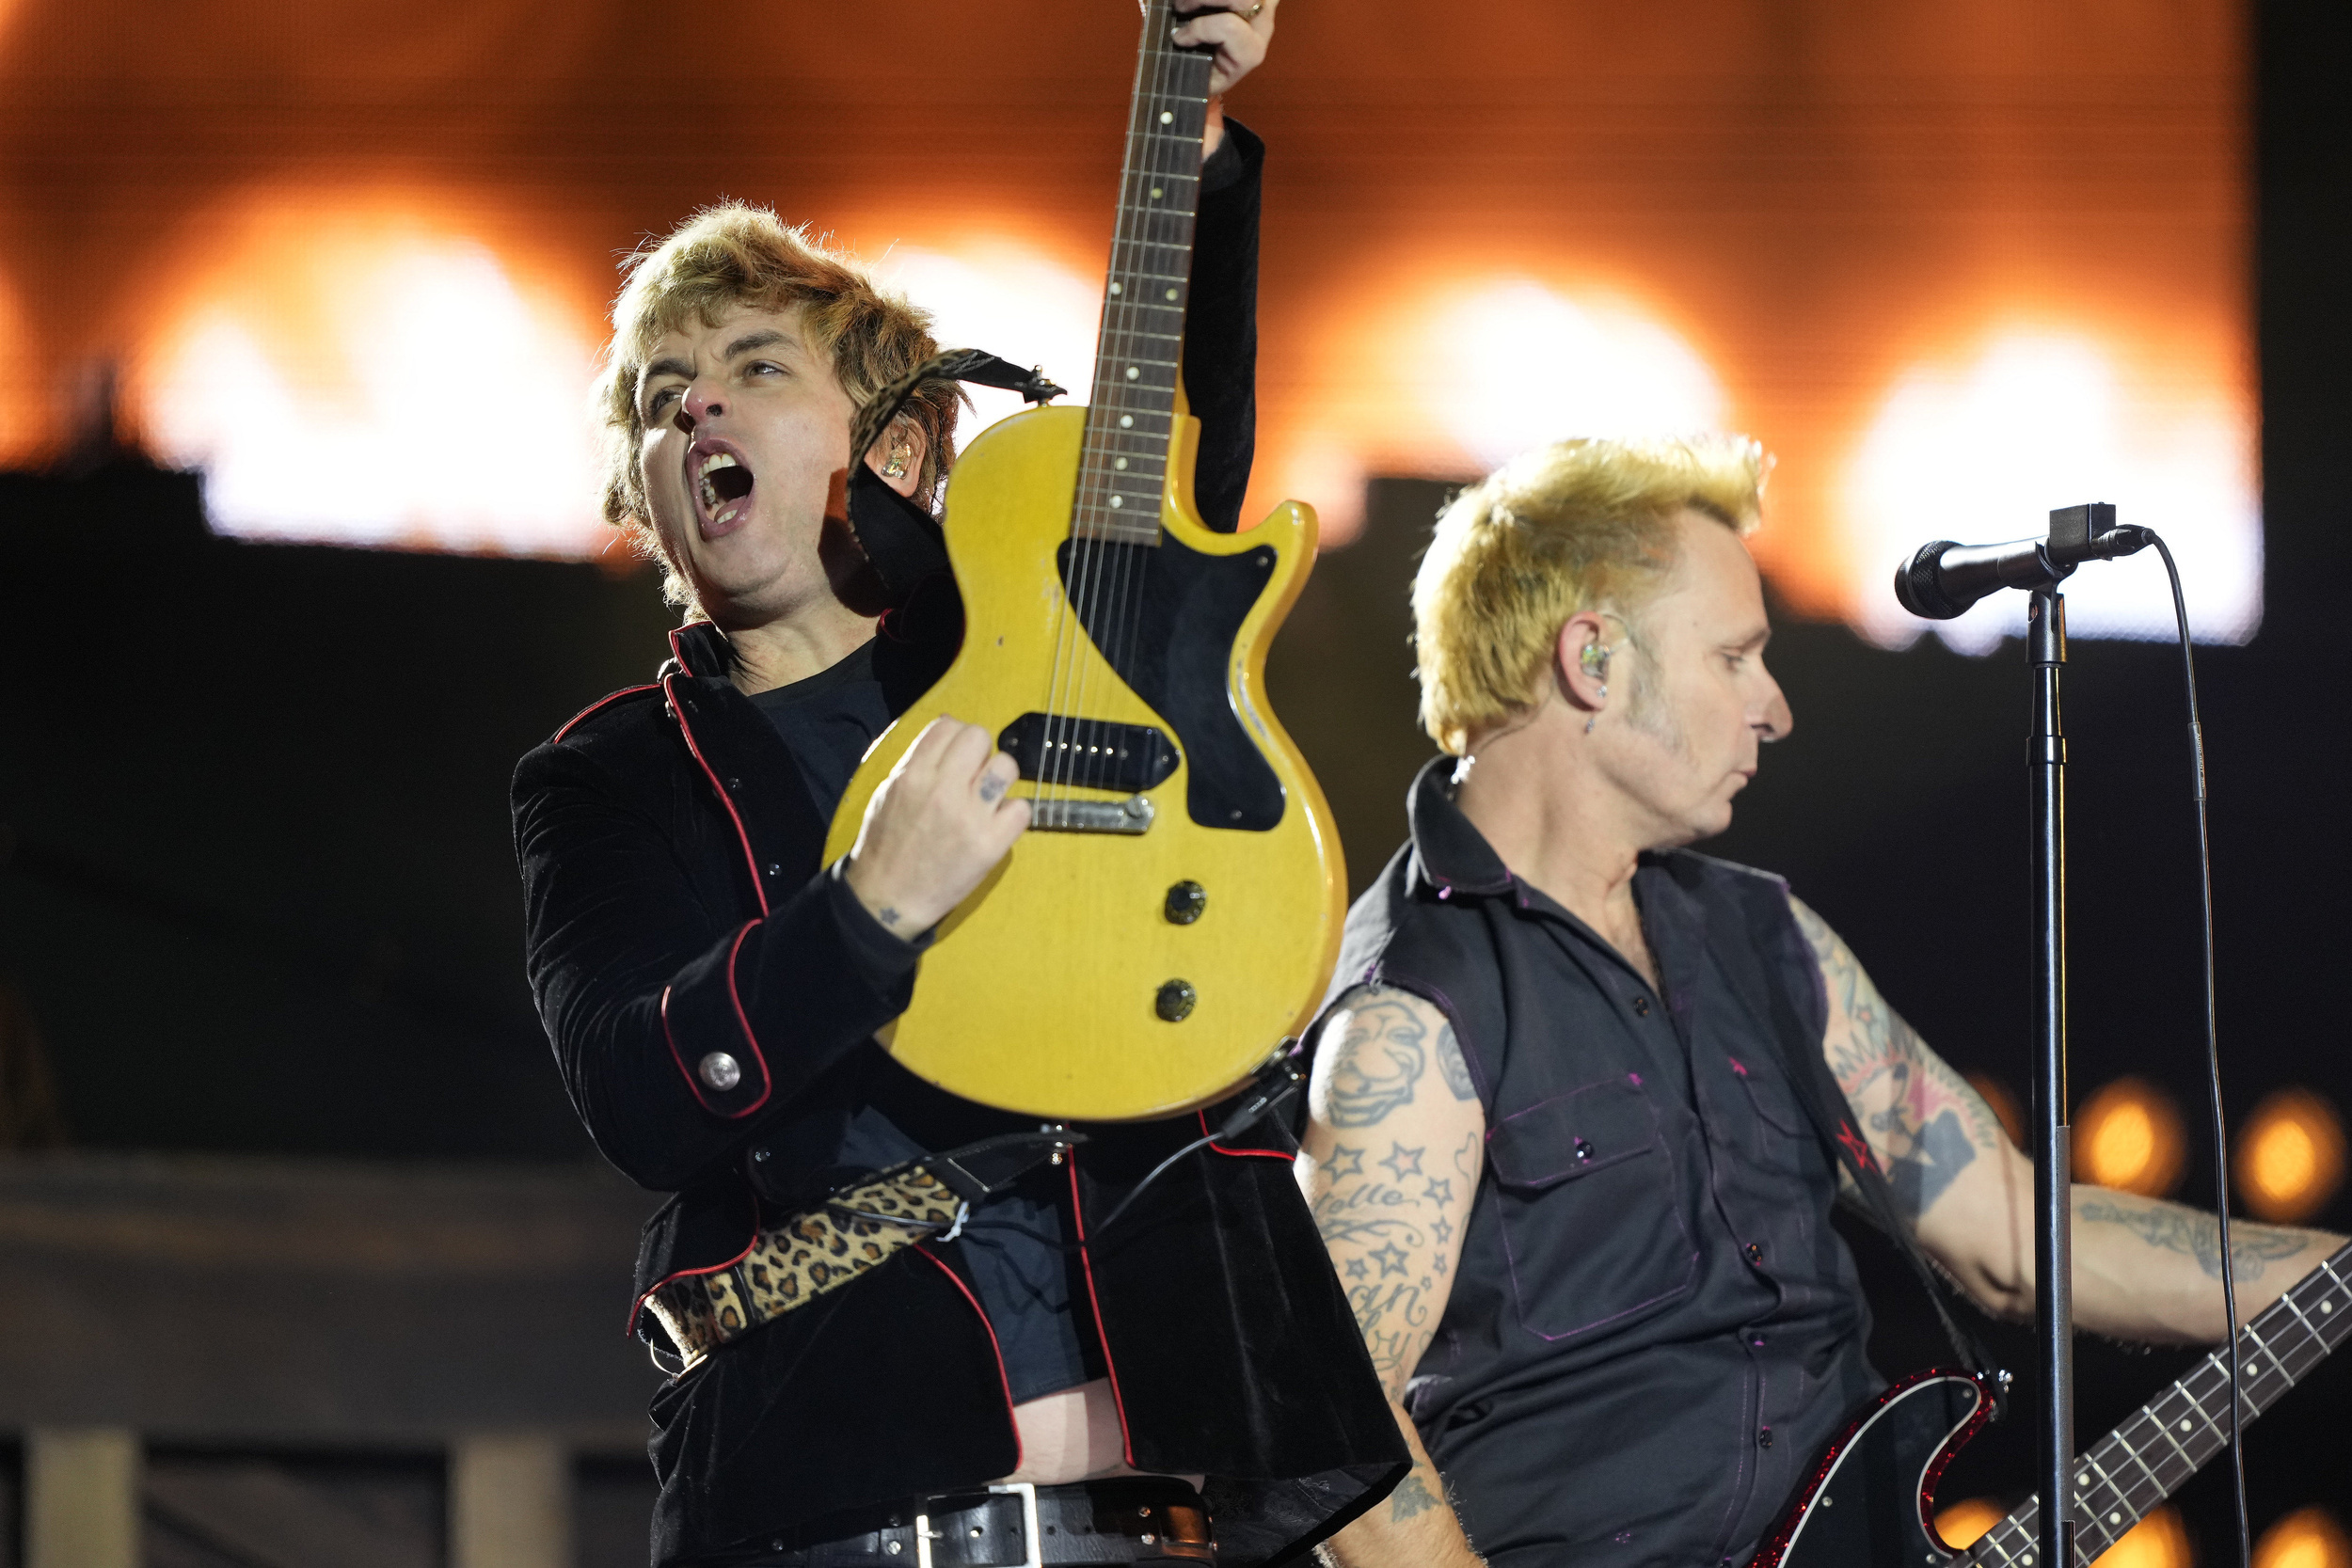 <p>This is going to be a massive year for Green Day, and The Saviors Tour should be one big party. In addition to supporting the band's 14th studio release, <em>Saviors </em>(officially dropped on Jan. 19), which includes already popular singles "The American Dream Is Killing Me" and "<a href="https://www.youtube.com/watch?v=jH3wmjaoADY">Look Ma, No Brains!</a>," the band is celebrating the 20th anniversary release of <em>American Idiot</em> and 30 years of <em>Dookie</em>. The tour kicks off in Europe in late May 30, then opens in North America in late July and concludes in San Diego on Sept. 29. The Hives are among the opening acts in Europe, with Smashing Pumpkins, Rancid and The Linda Lindas supporting in the U.S. and Canada.</p><p>You may also like: <a href='https://www.yardbarker.com/entertainment/articles/the_25_best_tv_sitcom_neighbors_030424/s1__34553024'>The 25 best TV sitcom neighbors</a></p>